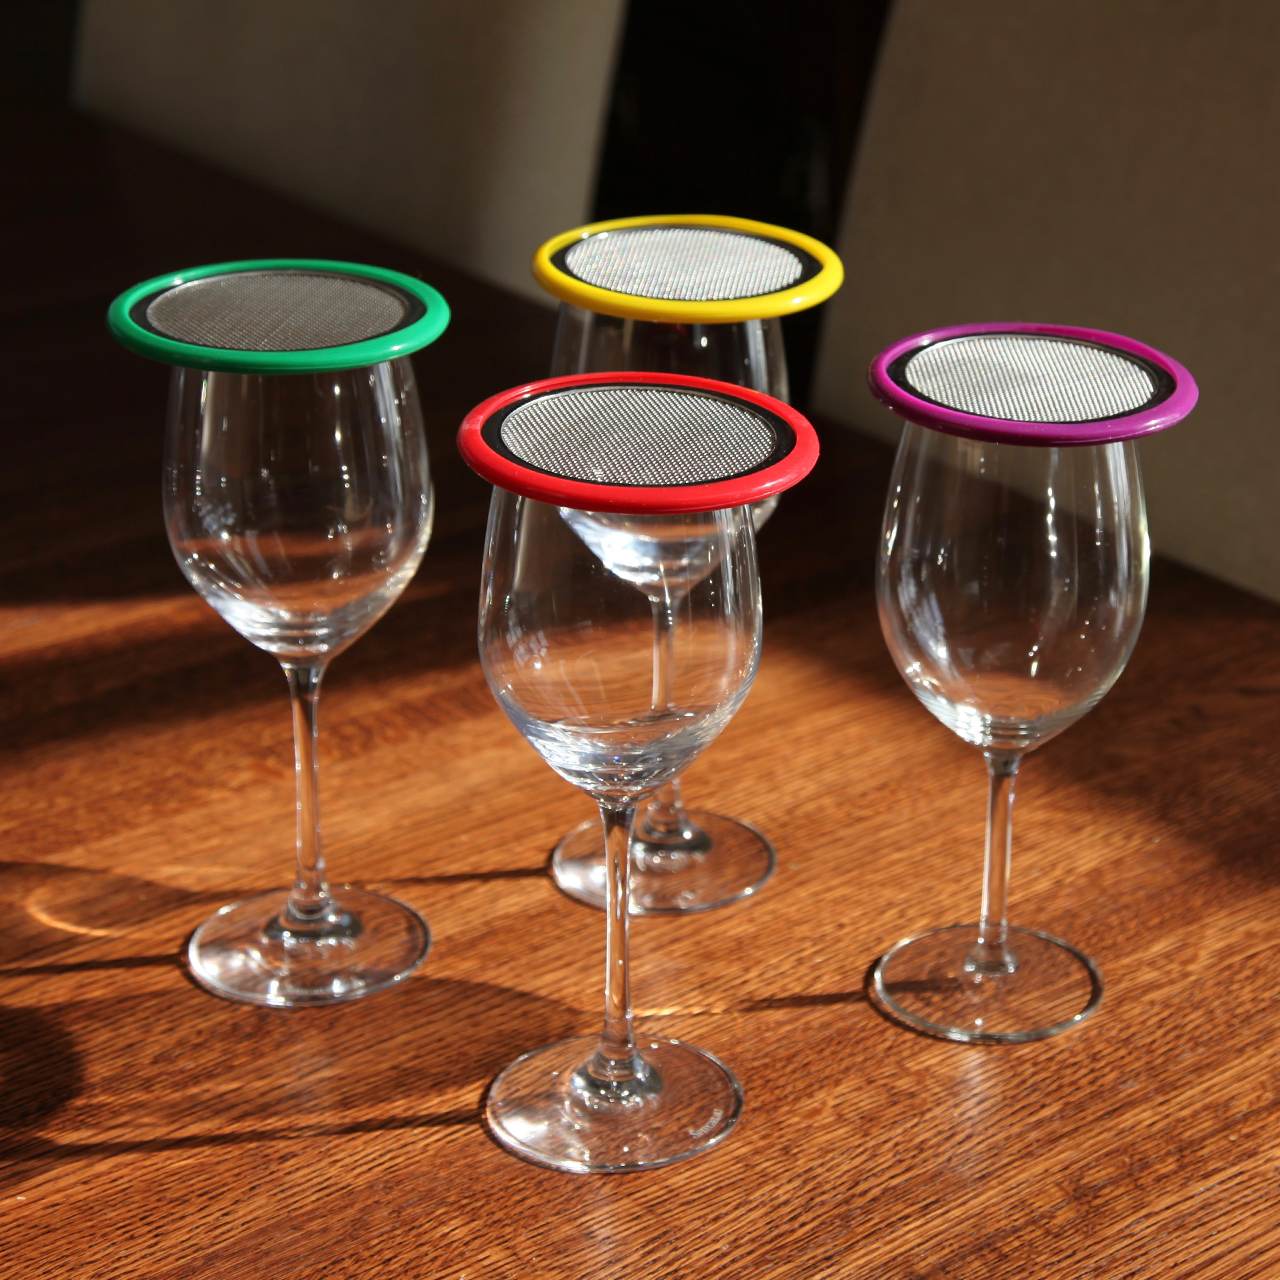 Drinking Glass Covers